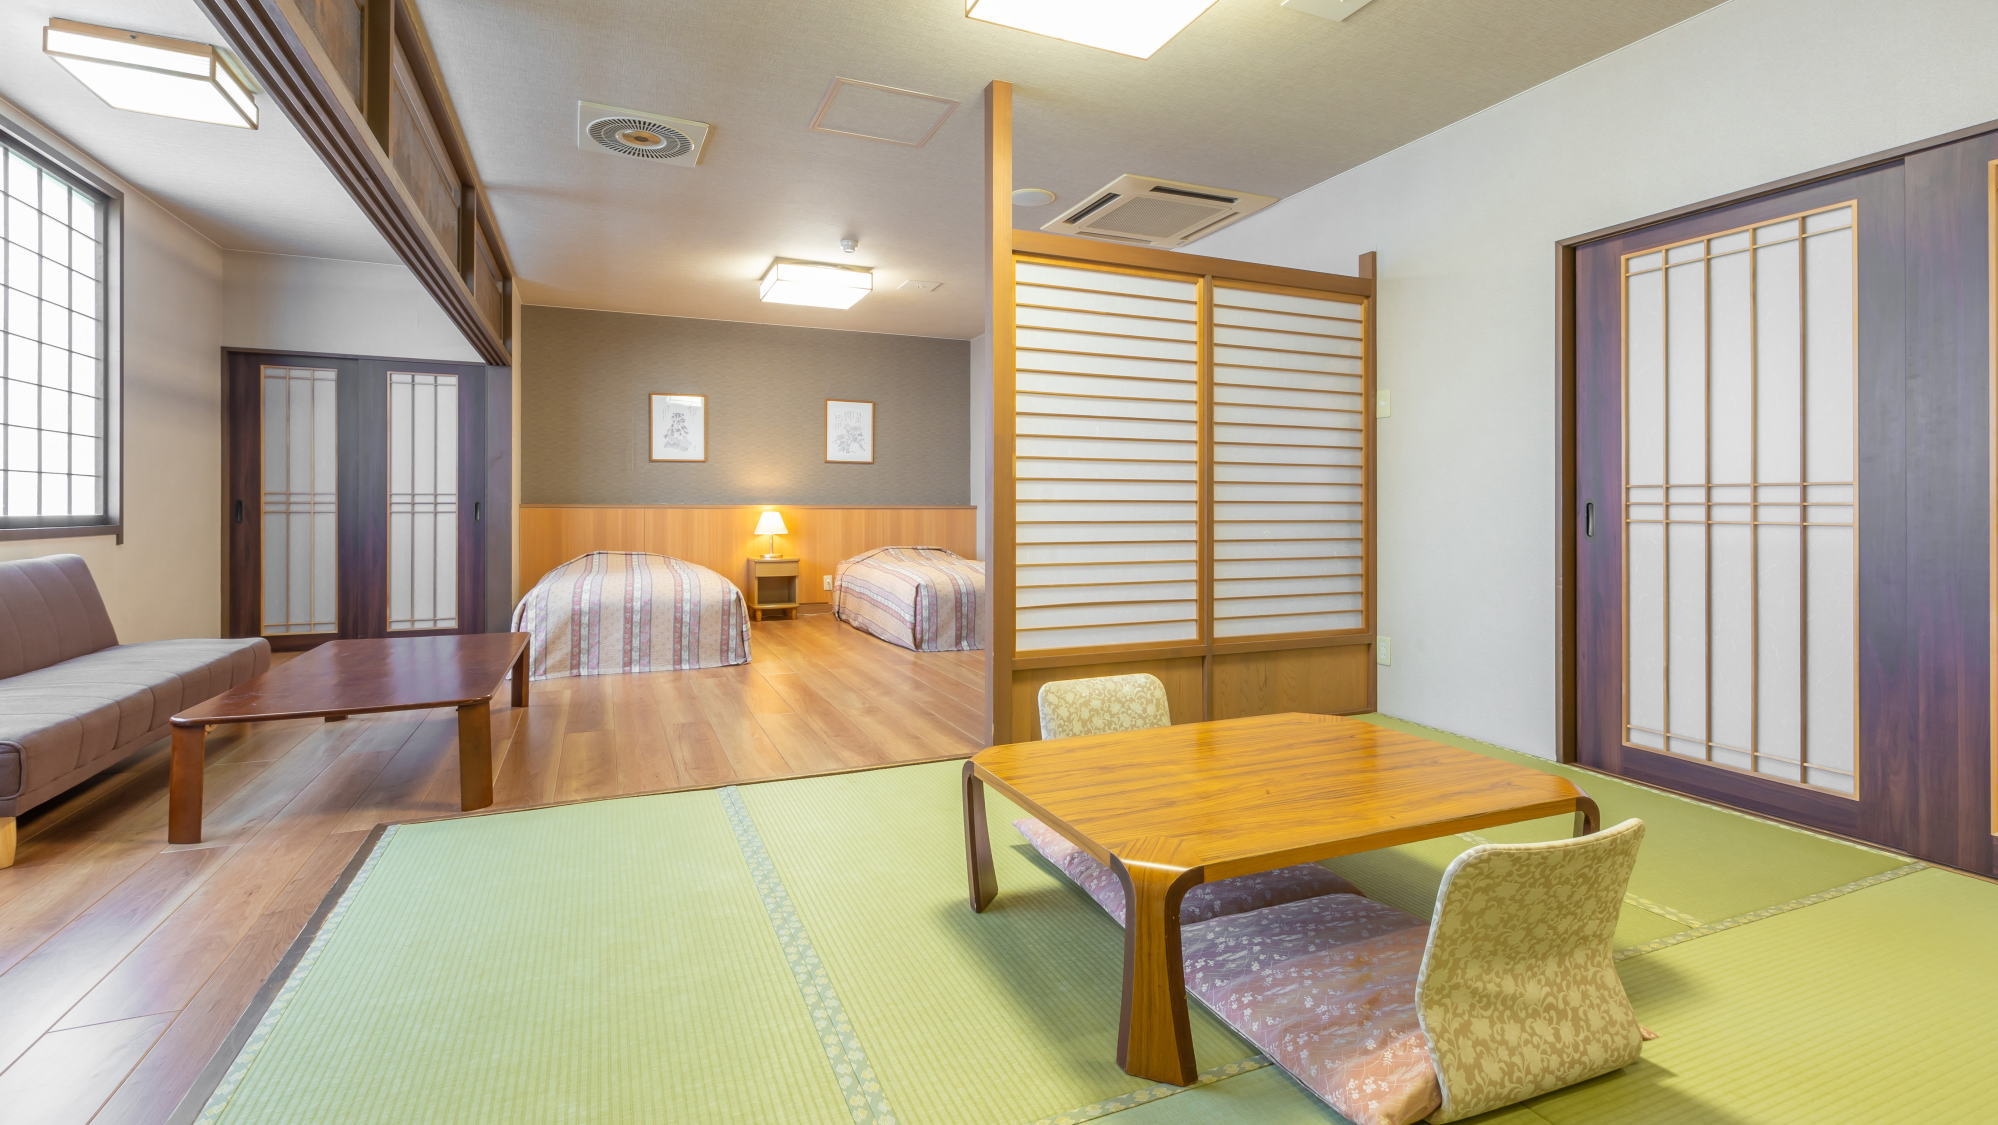 [East Building Japanese-Western Room] This is a room with twin beds and a Japanese-style room with 8 tatami mats.